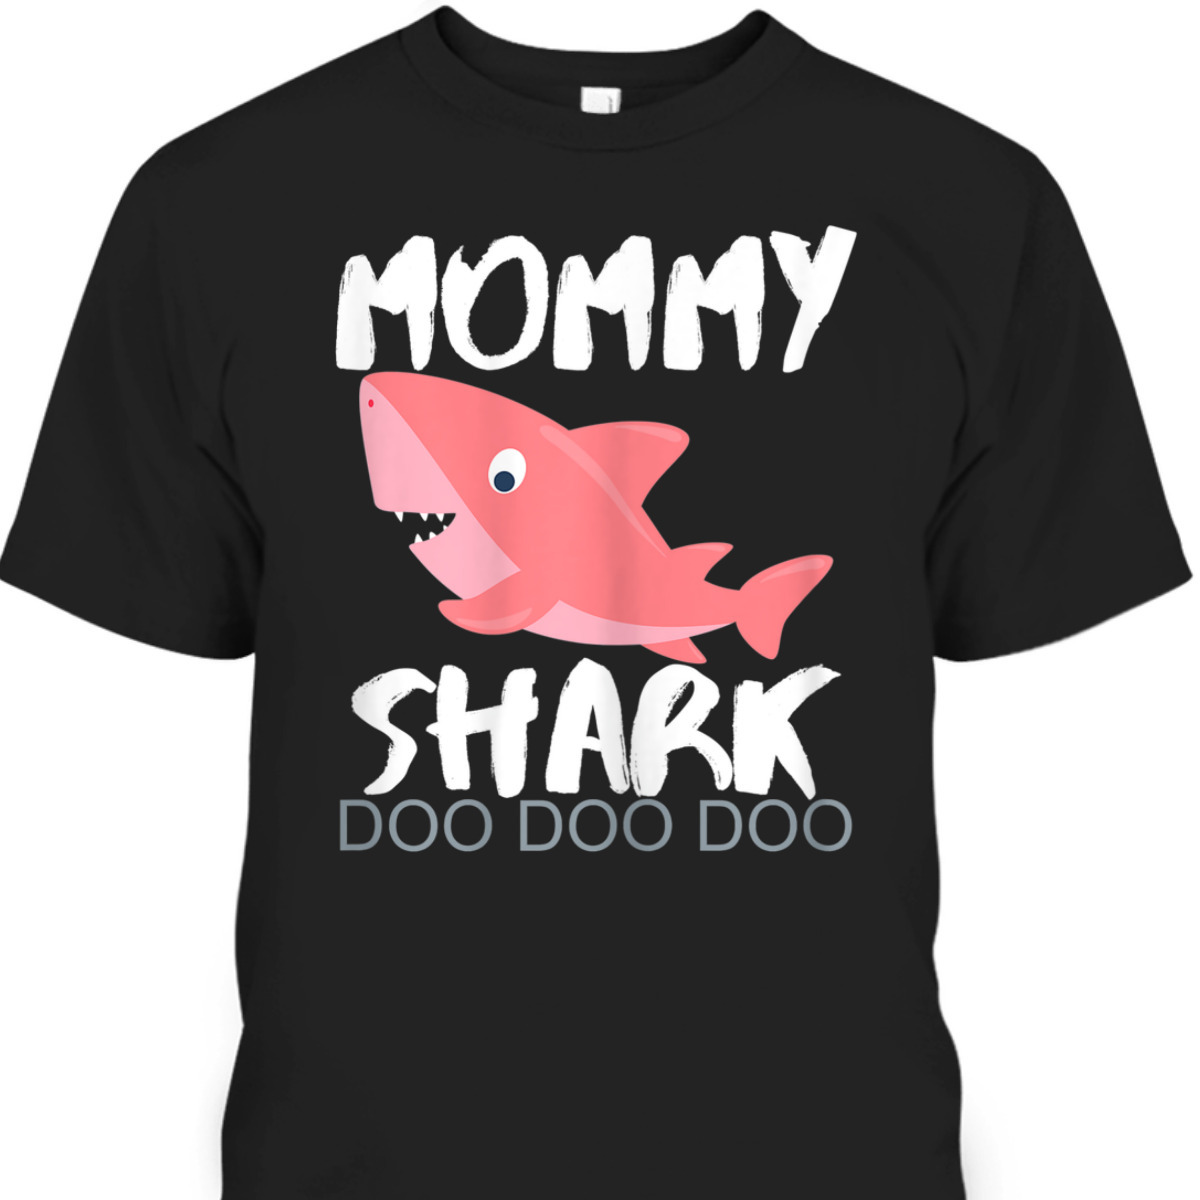 Mother's Day T-Shirt Mommy Shark Doo Doo Doo Cool Gift For Wife